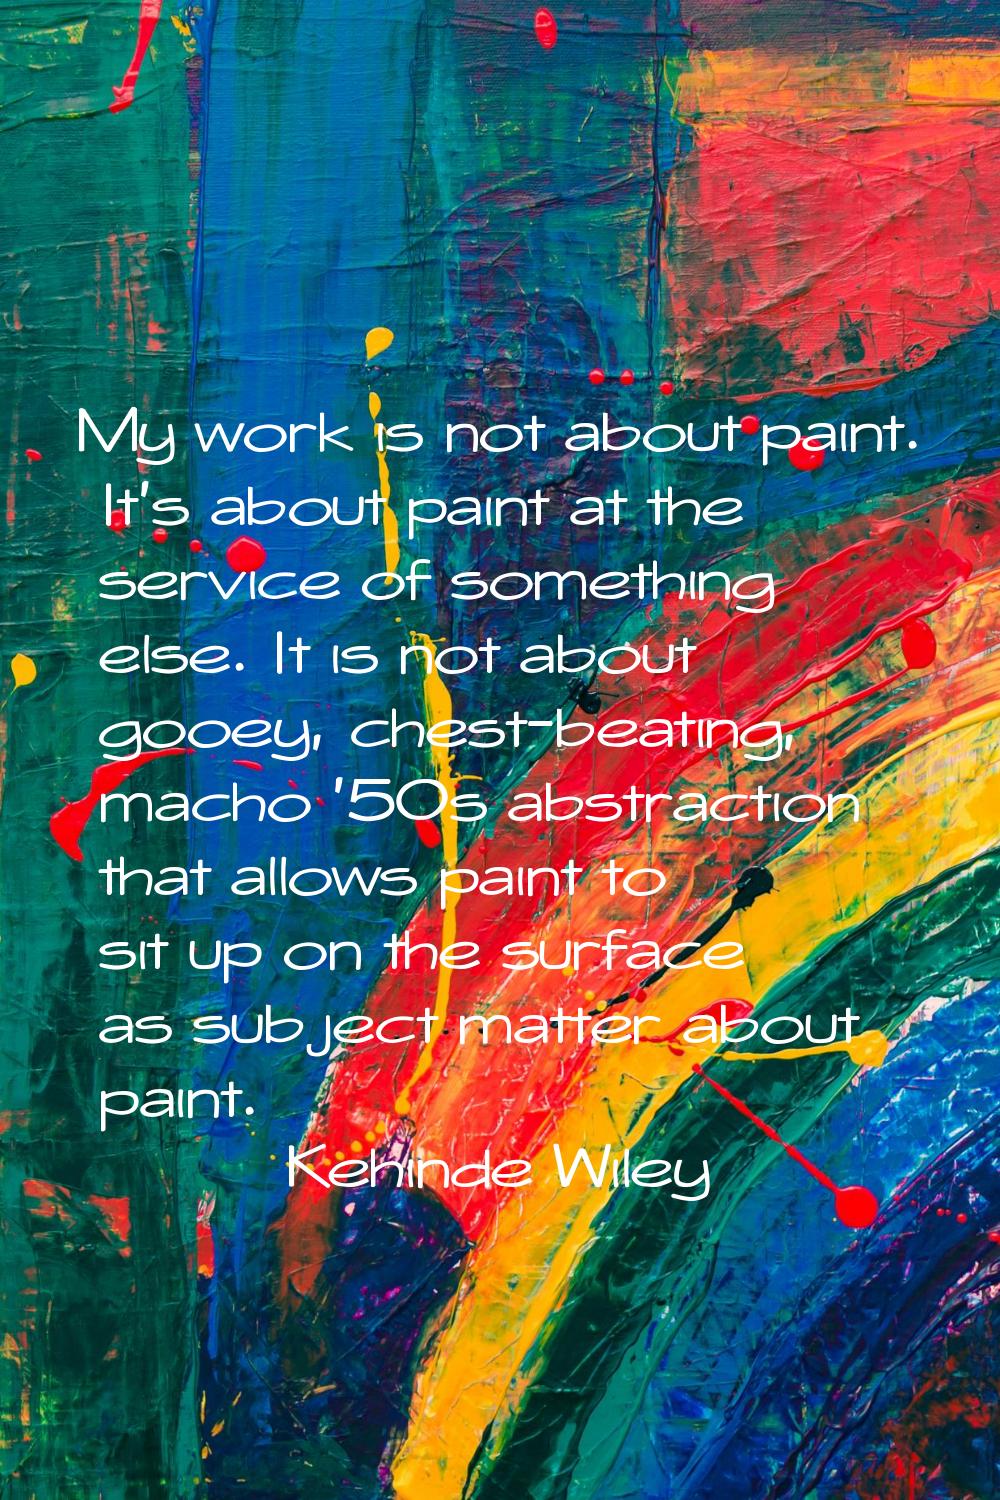 My work is not about paint. It's about paint at the service of something else. It is not about gooe